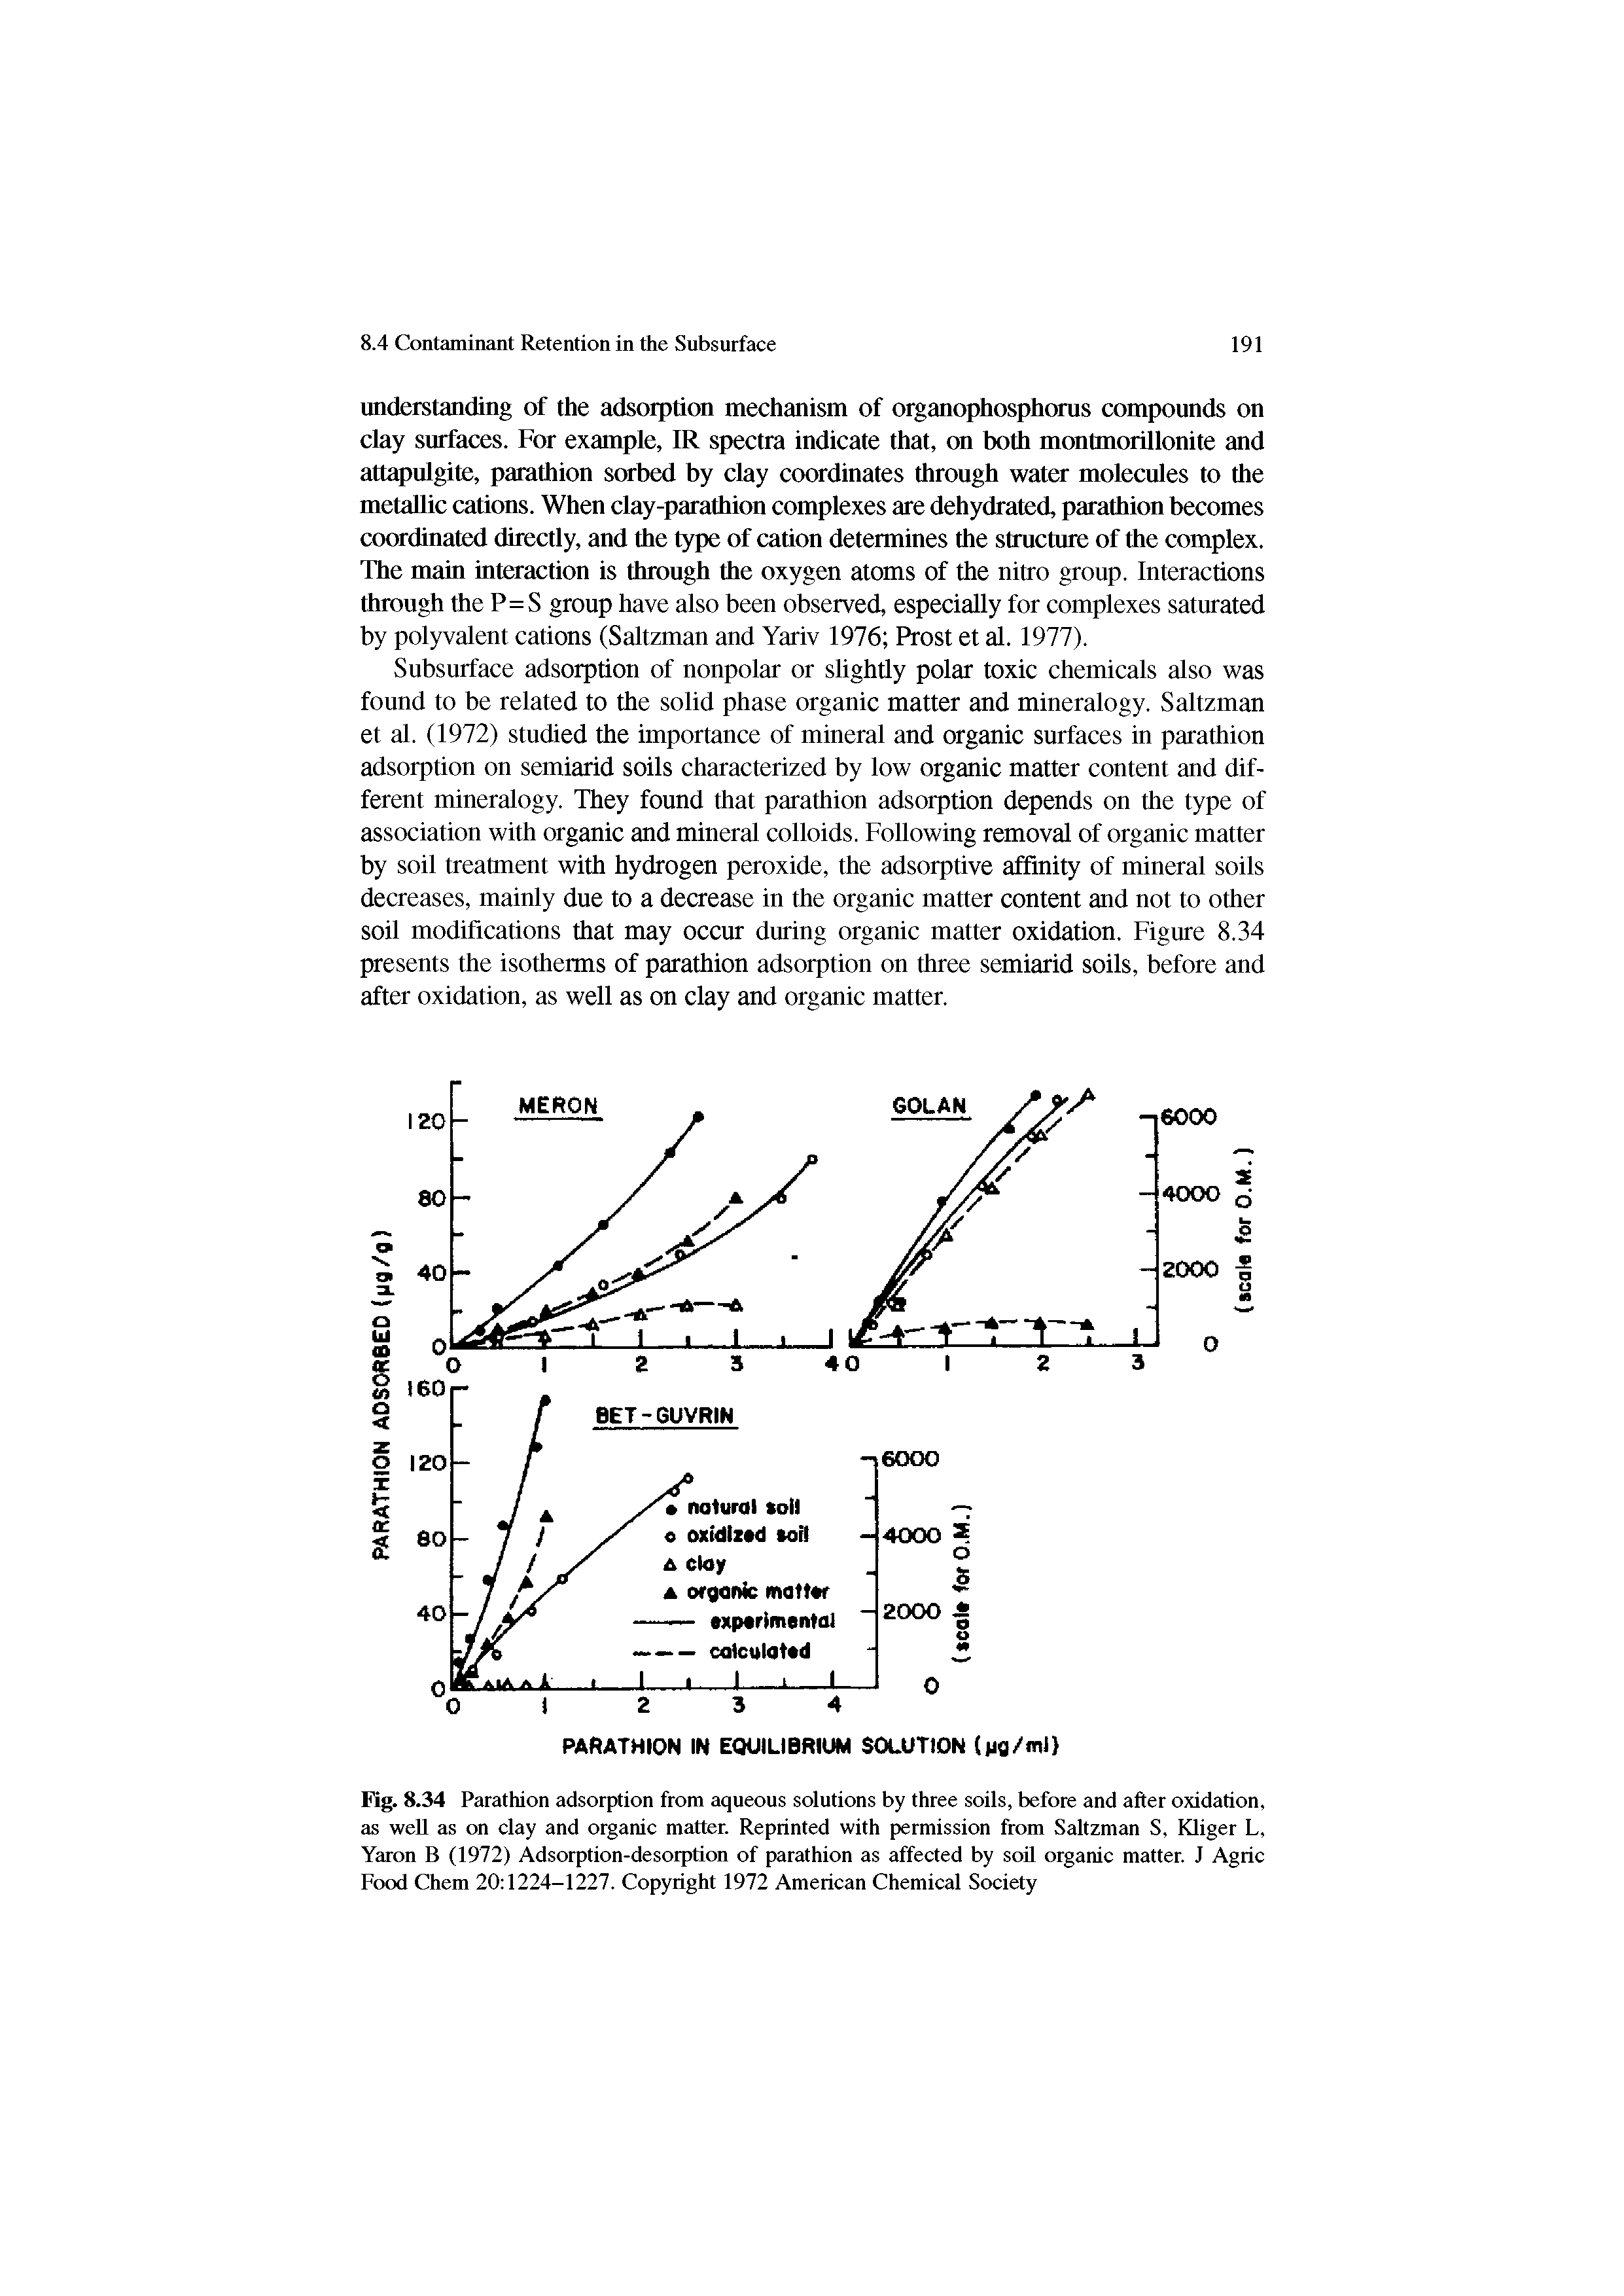 Fig. 8.34 Parathion adsorption from aqueous solutions by three soils, before and after oxidation, as weU as on clay and organic matter. Reprinted with permission from Saltzman S, Kliger L, Yaron B (1972) Adsorption-desorption of parathion as affected by soil organic matter. J Agric Food Chem 20 1224-1227. Copyright 1972 American Chemical Society...